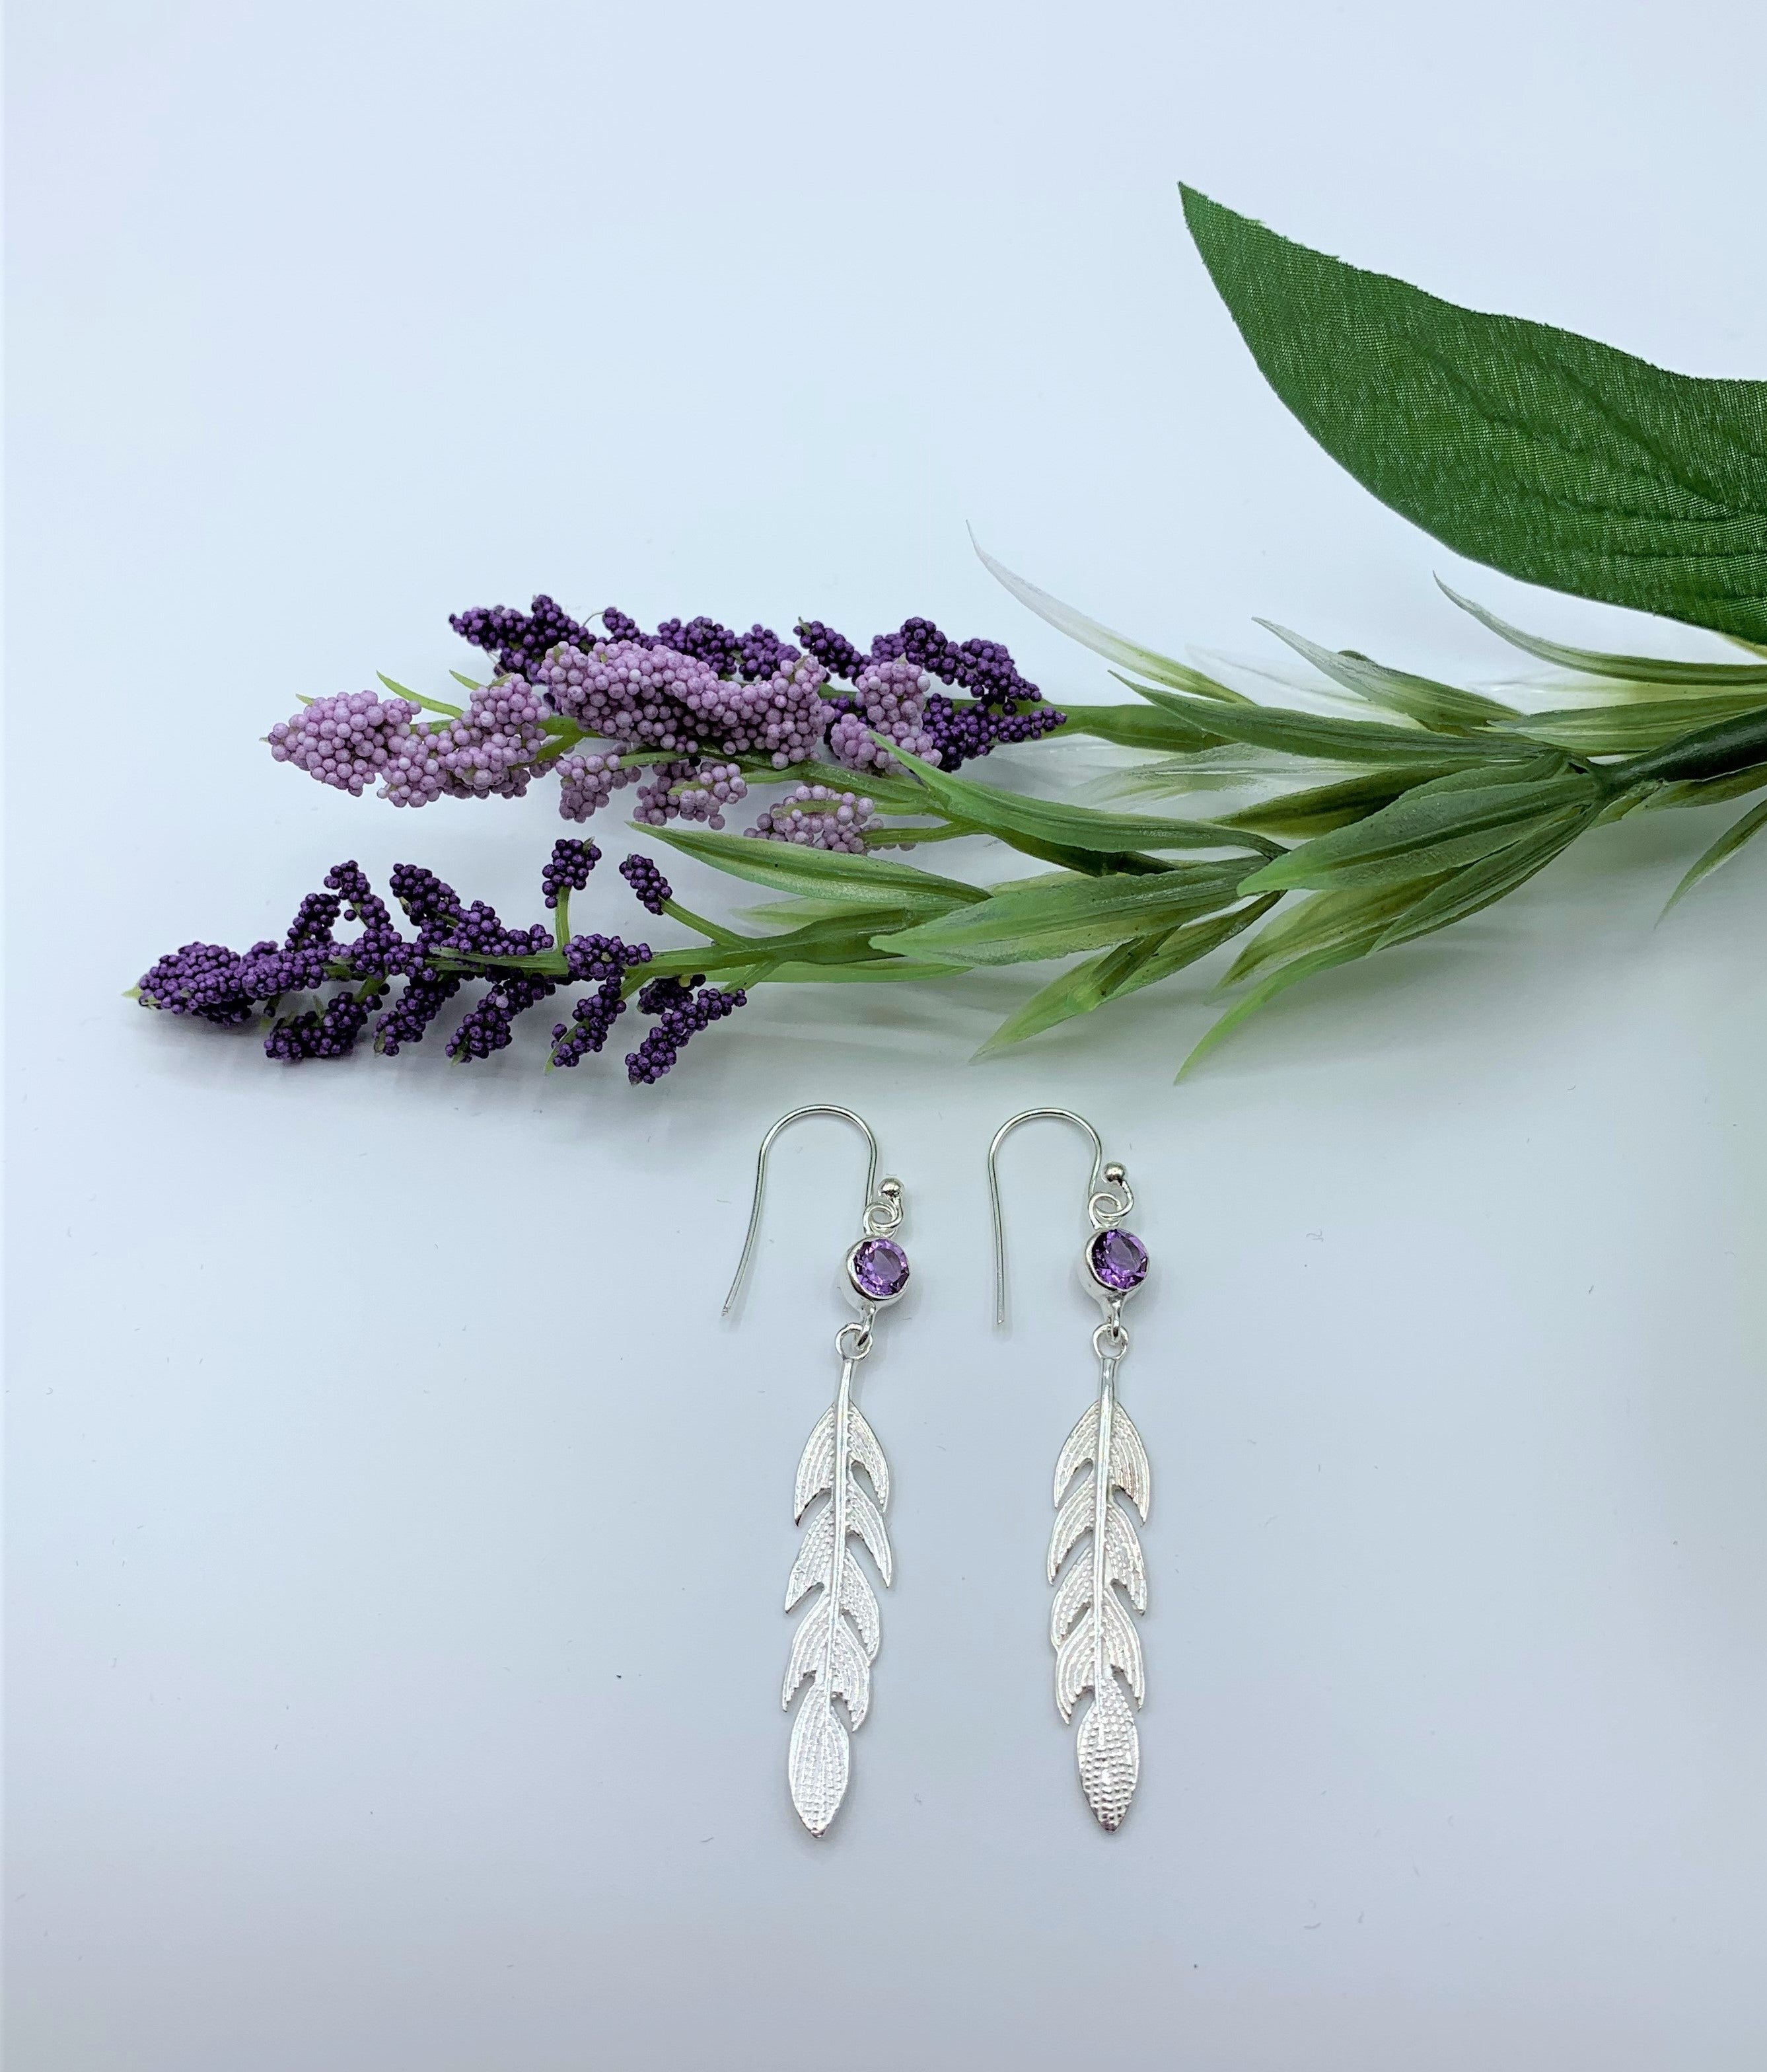 Another view of the round faceted amethyst gemstones set in sterling silver (one in each earring) with long sterling feathers dangling below them. These have wires, not posts and are approximately 2" long.